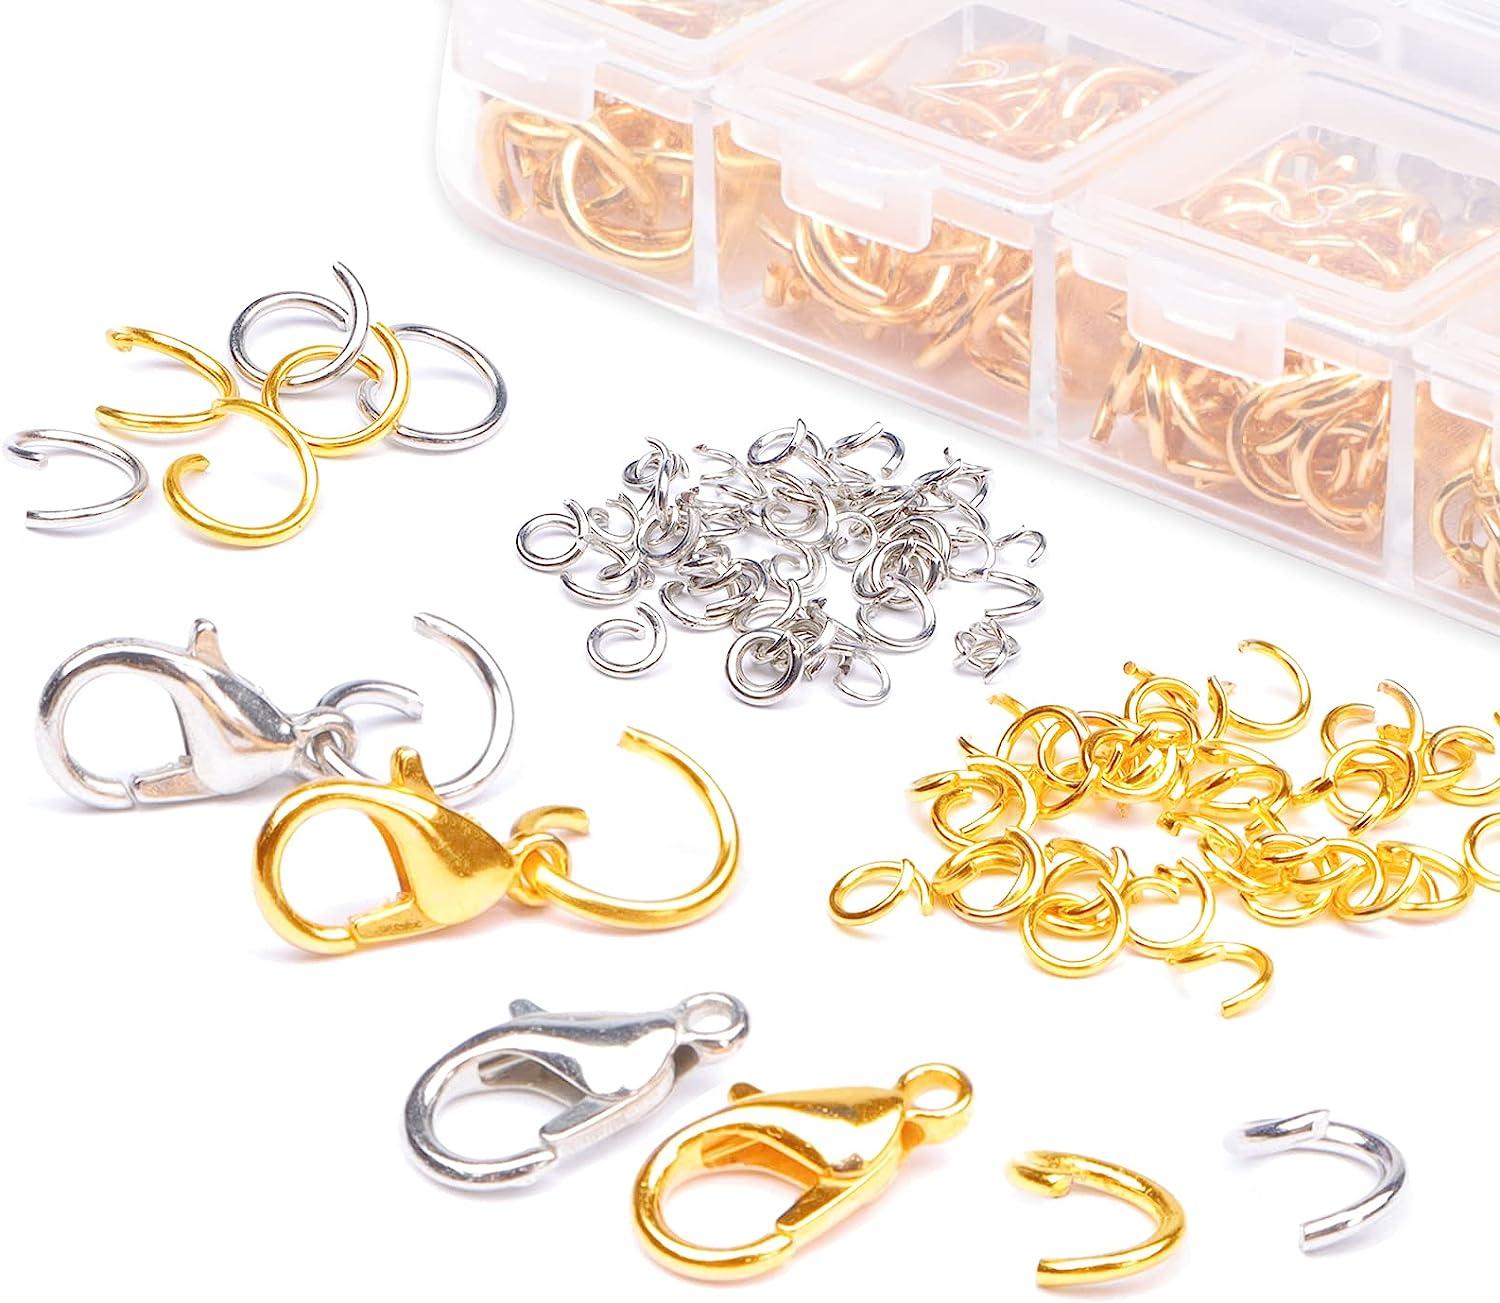 Jewelry Jump Rings for Jewelry Making Supplies and Necklace Repair with Jump Ring Pliers and Open Jump Ring, Adult Unisex, Size: One size, Gold